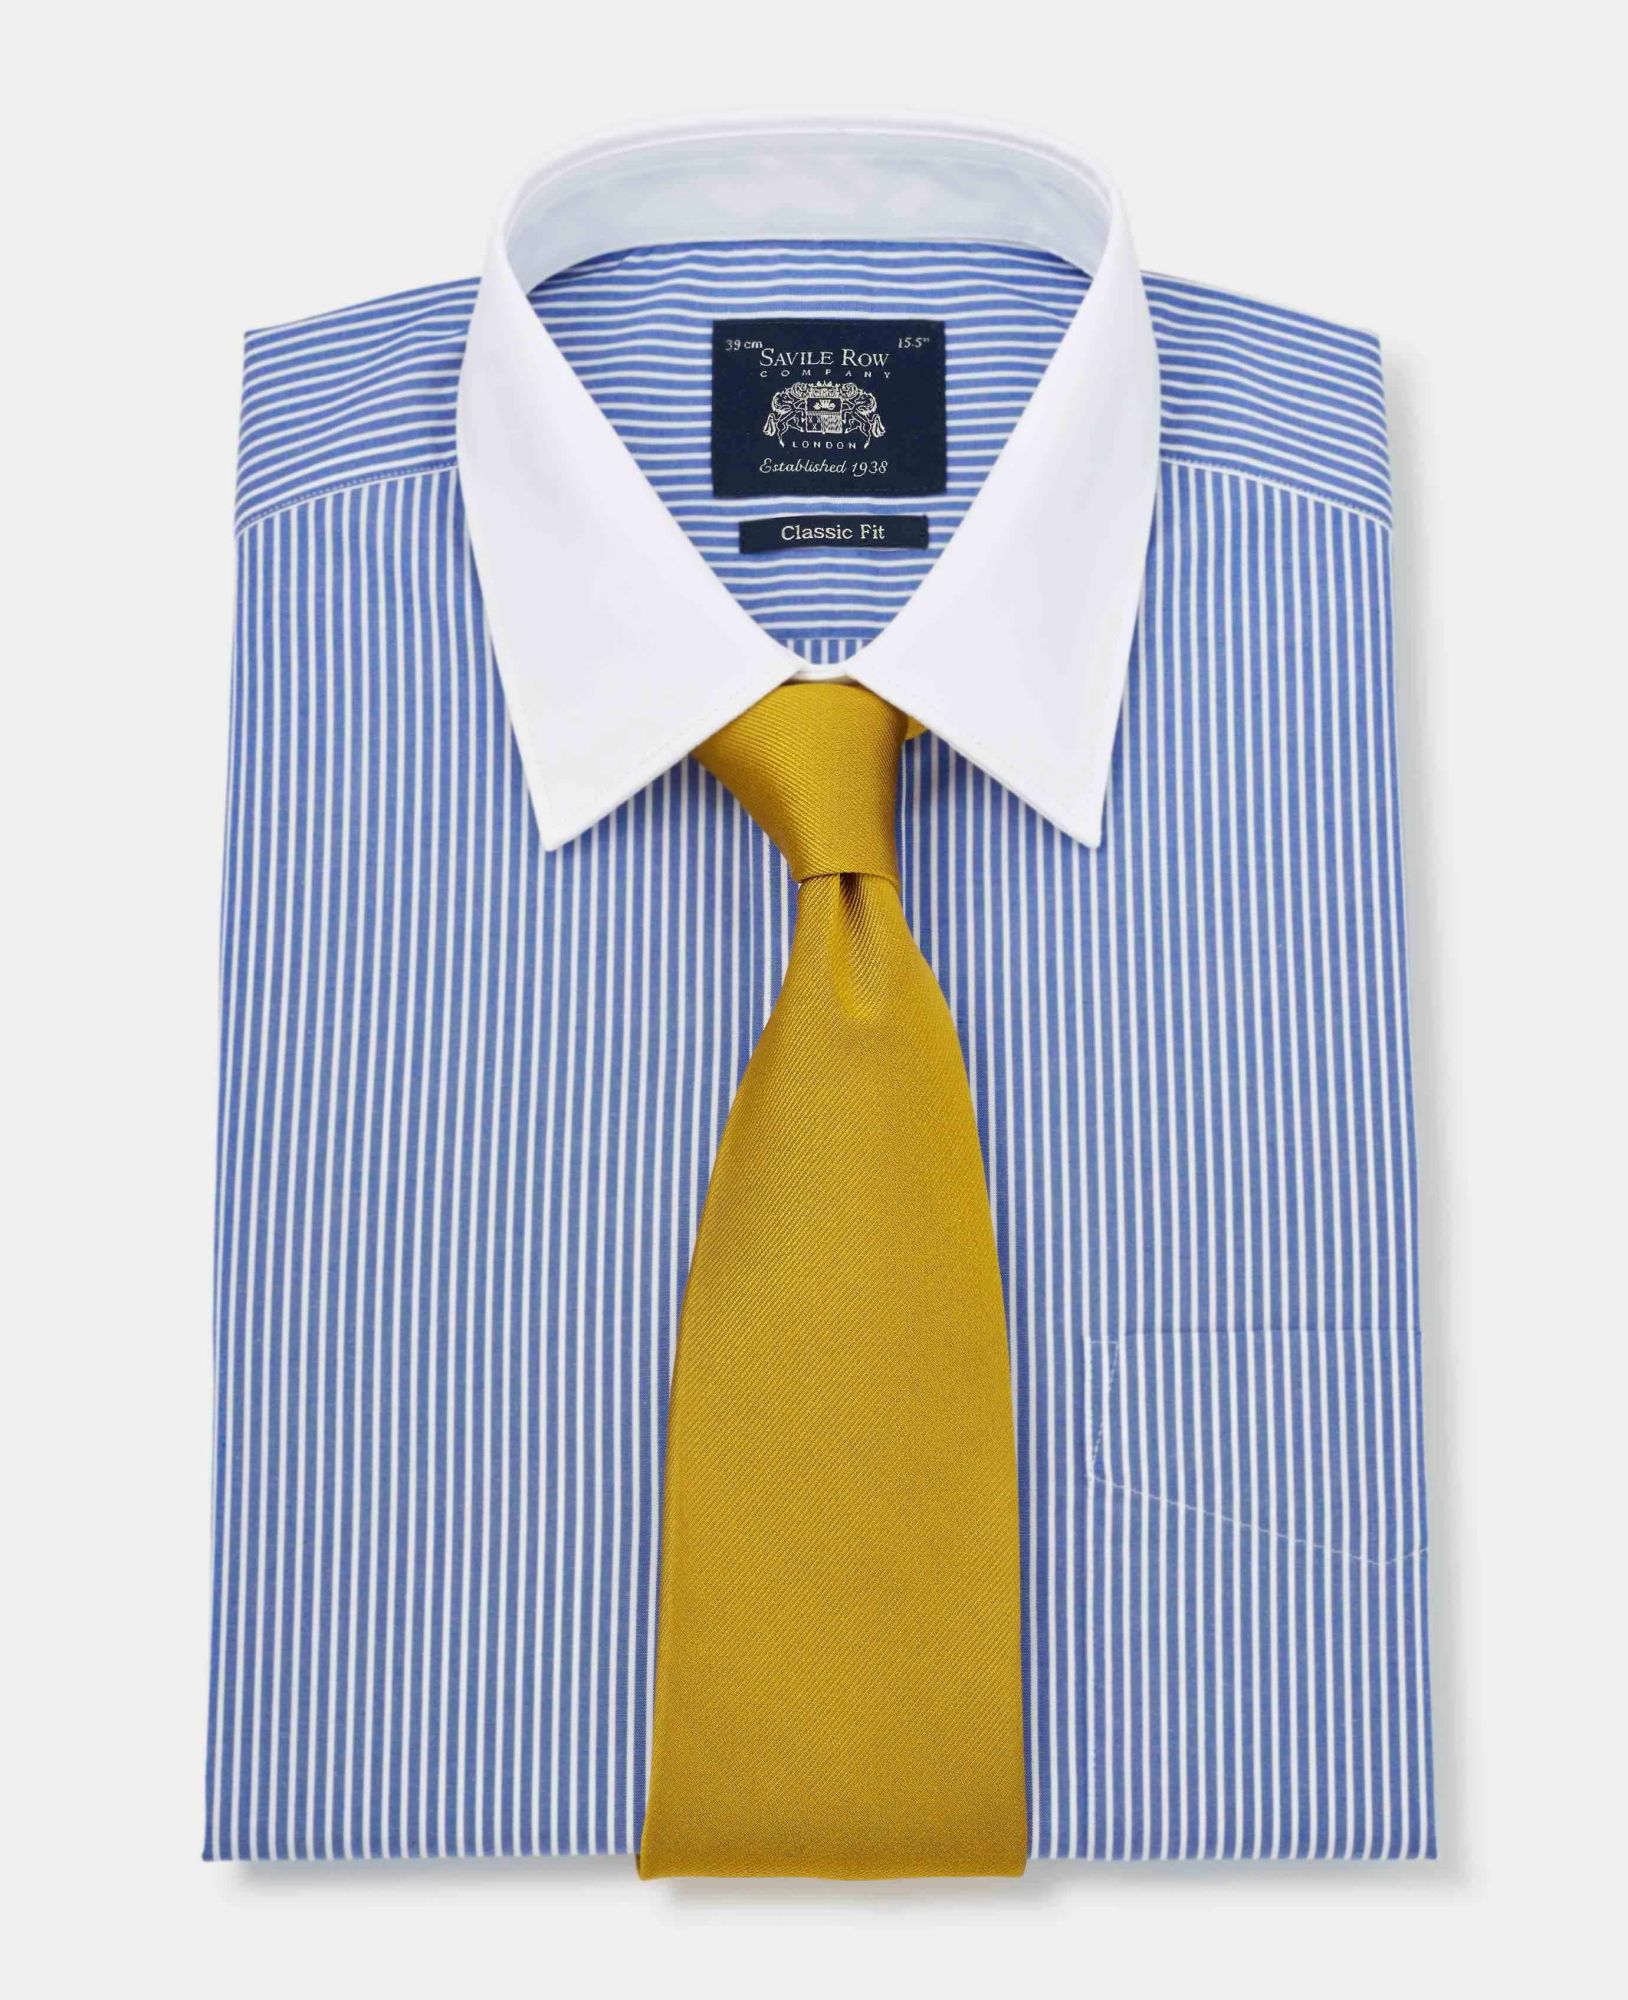 Royal Blue White Stripe Classic Fit Shirt With White Collar & Cuffs - Double Cuff 20